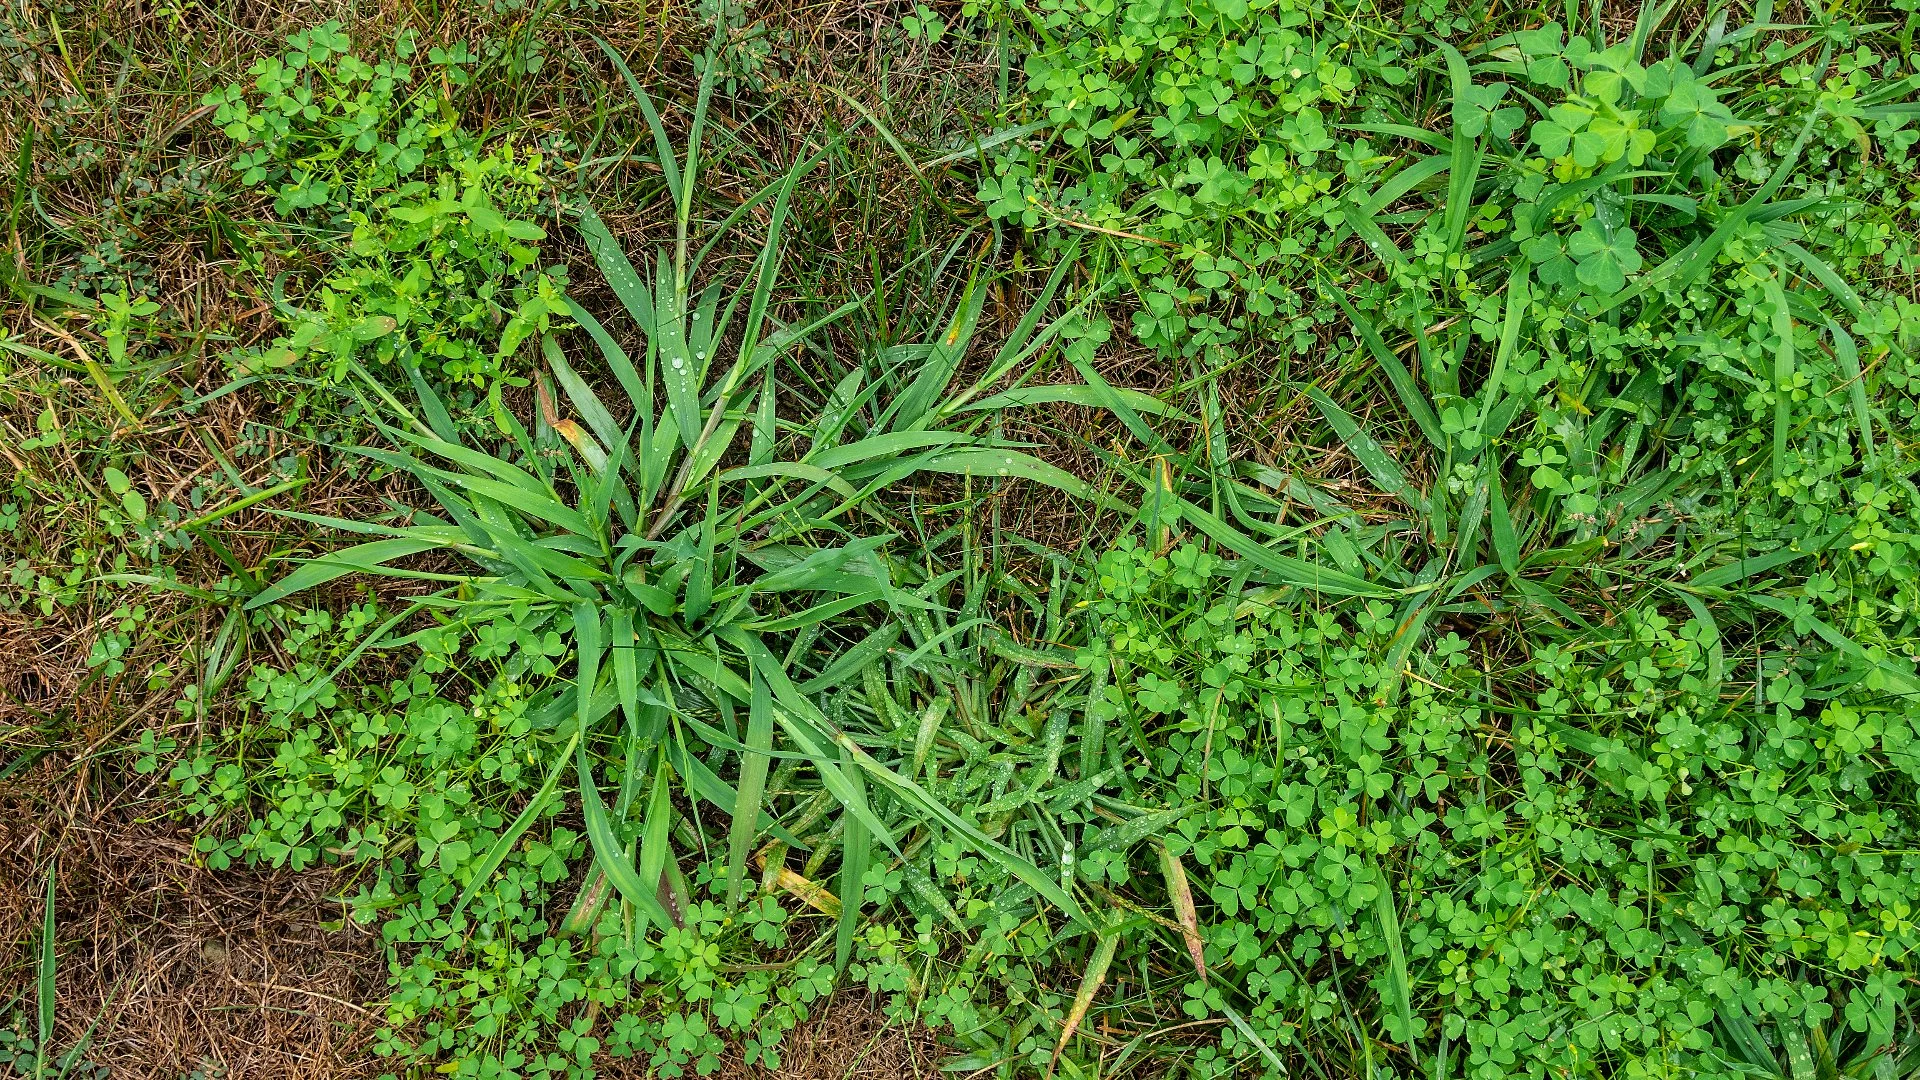 4 Nuisance Weeds That Can Take Over Your Lawn in Grand Junction, CO